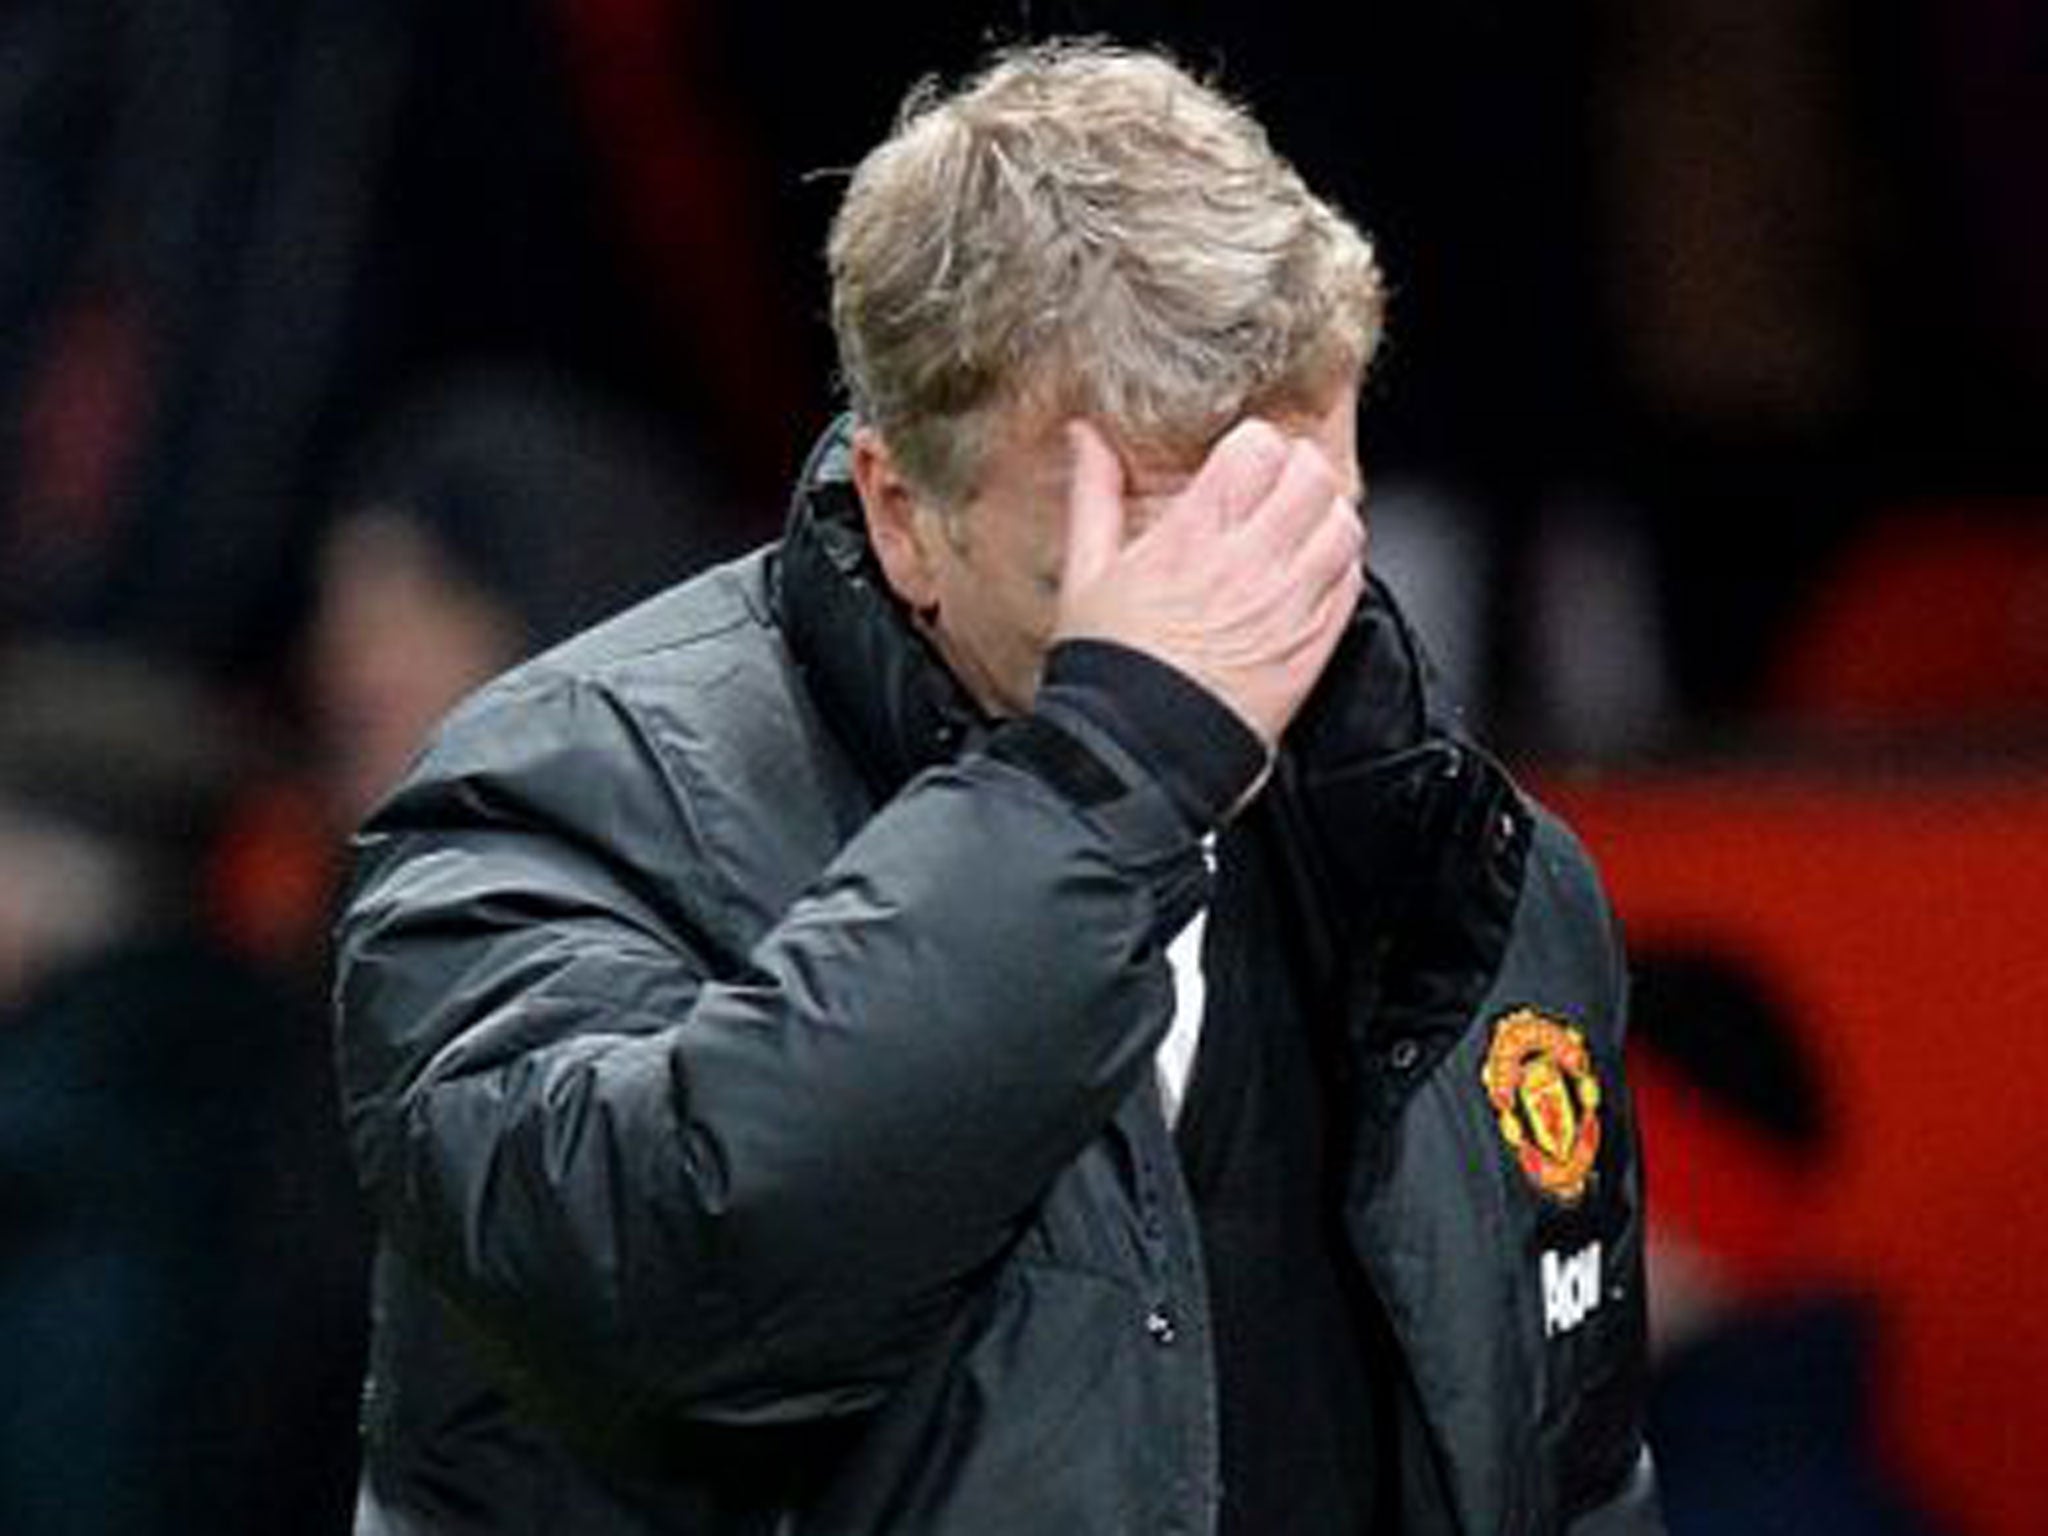 Manchester United manager David Moyes is enduring a tough first season at Old Trafford